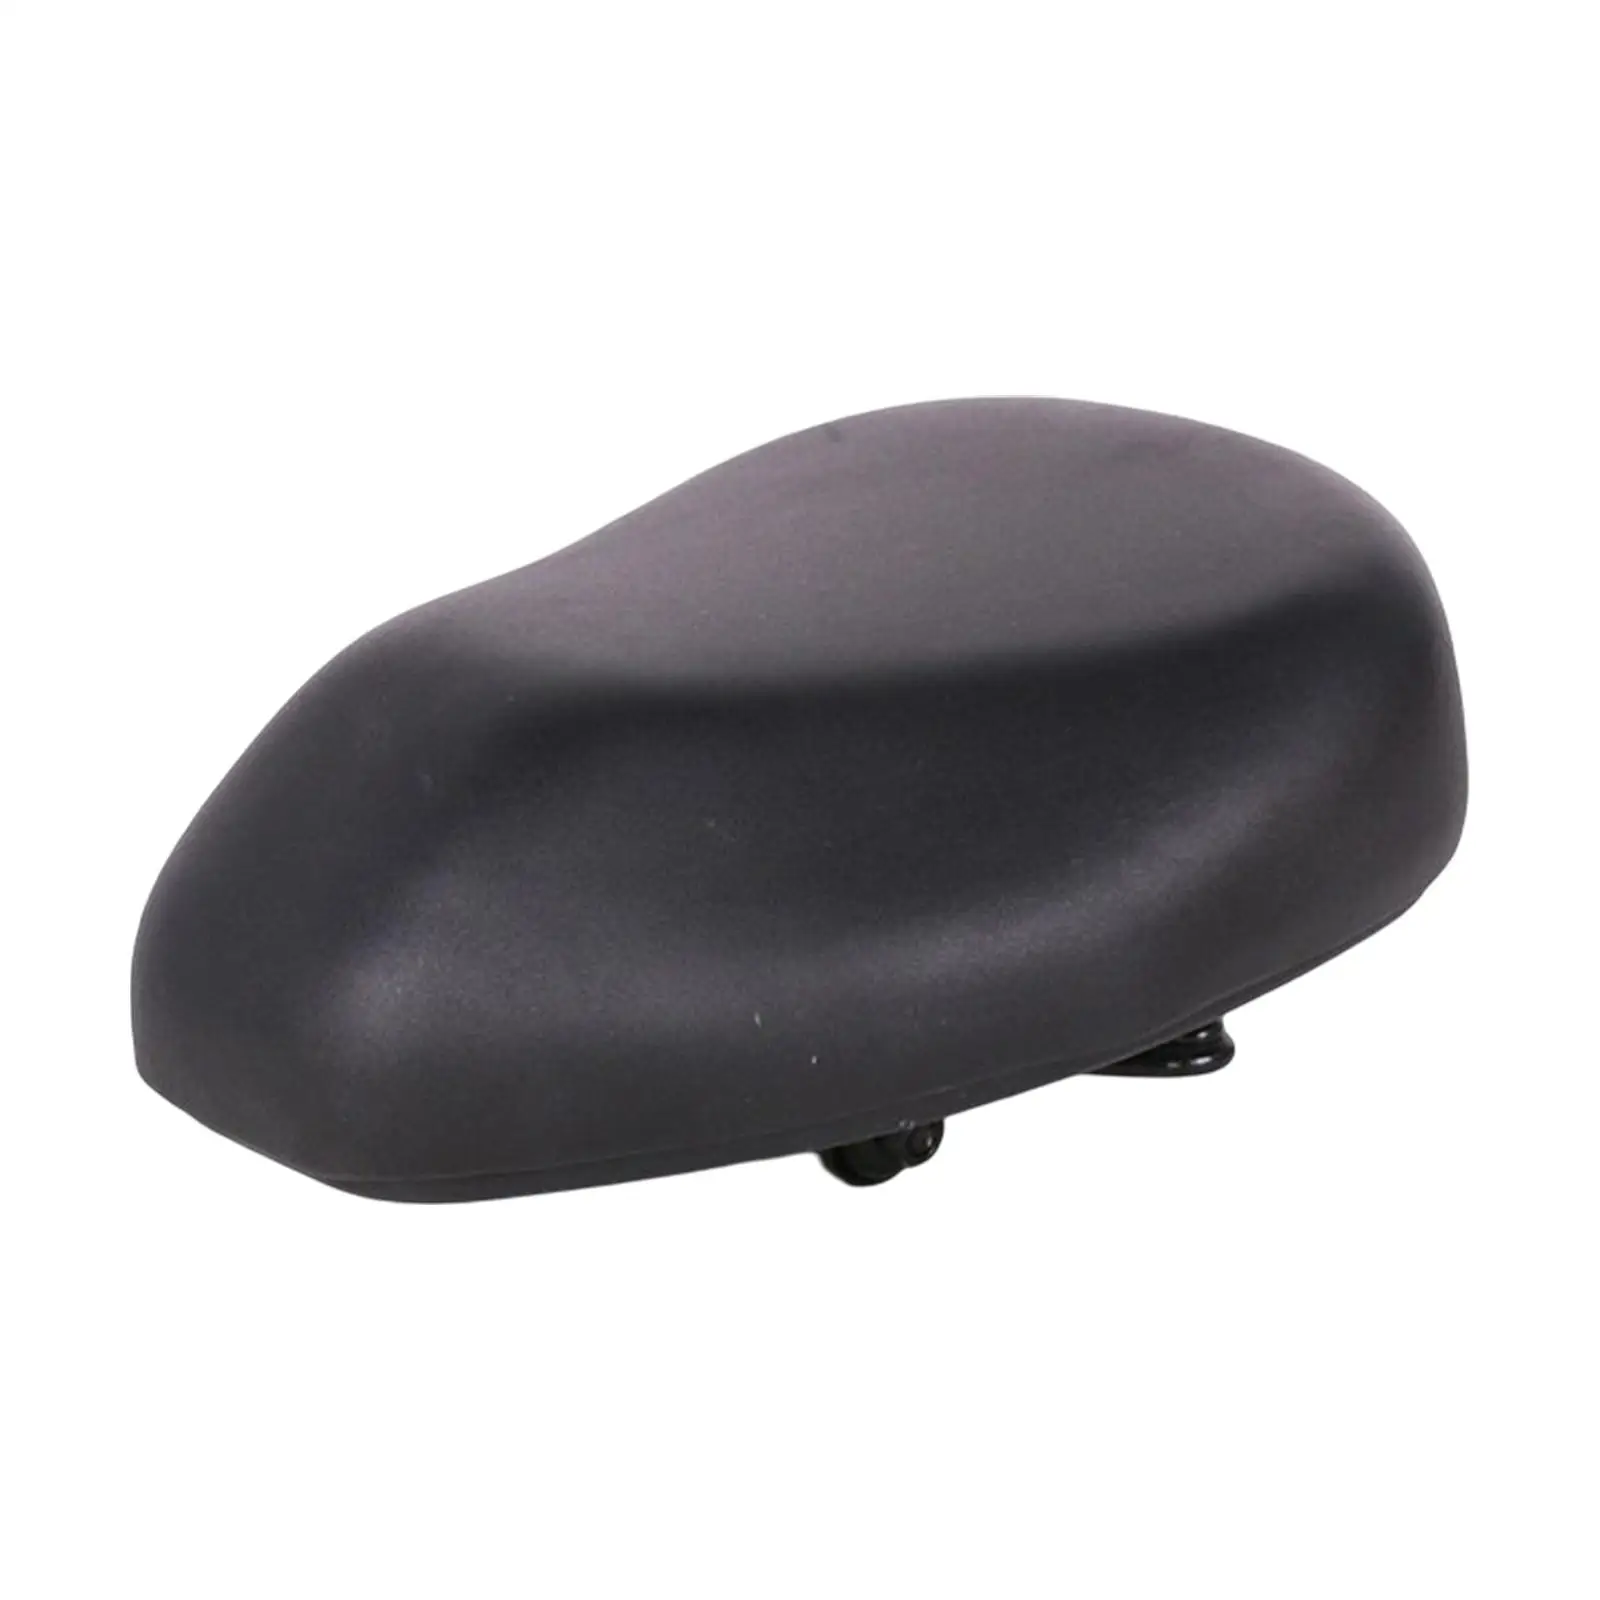 Bike Seat Cushion Cover Replacement Saddle Soft for Electric Scooter